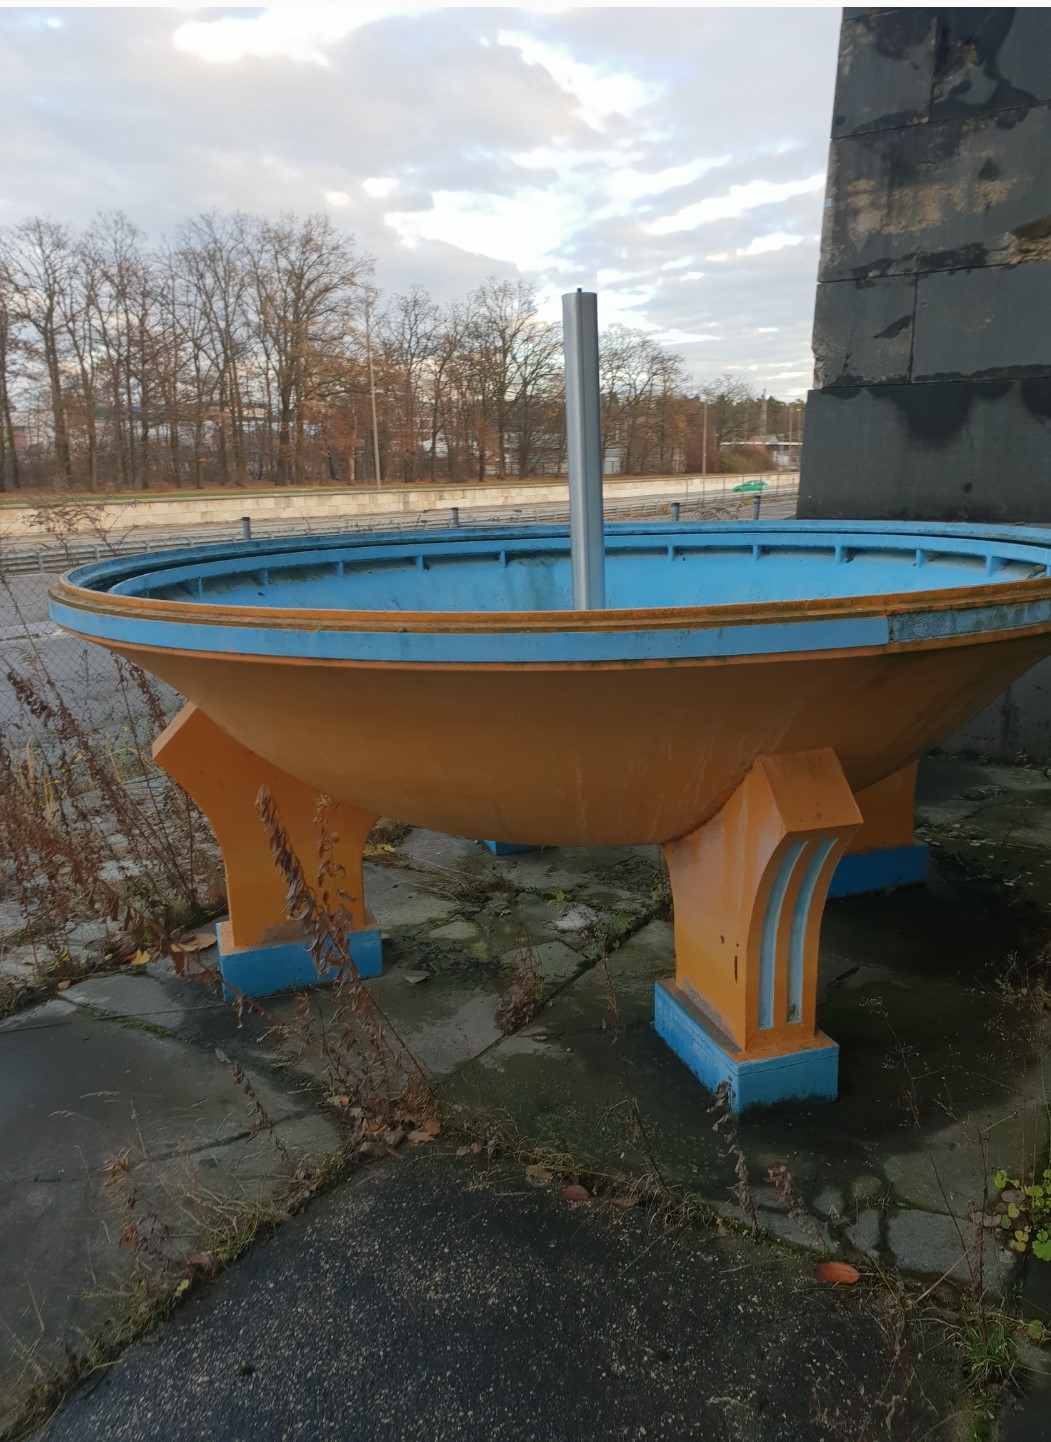 Repurposed infrastructure, a fire bowl from a Nazi Rally now lies unused